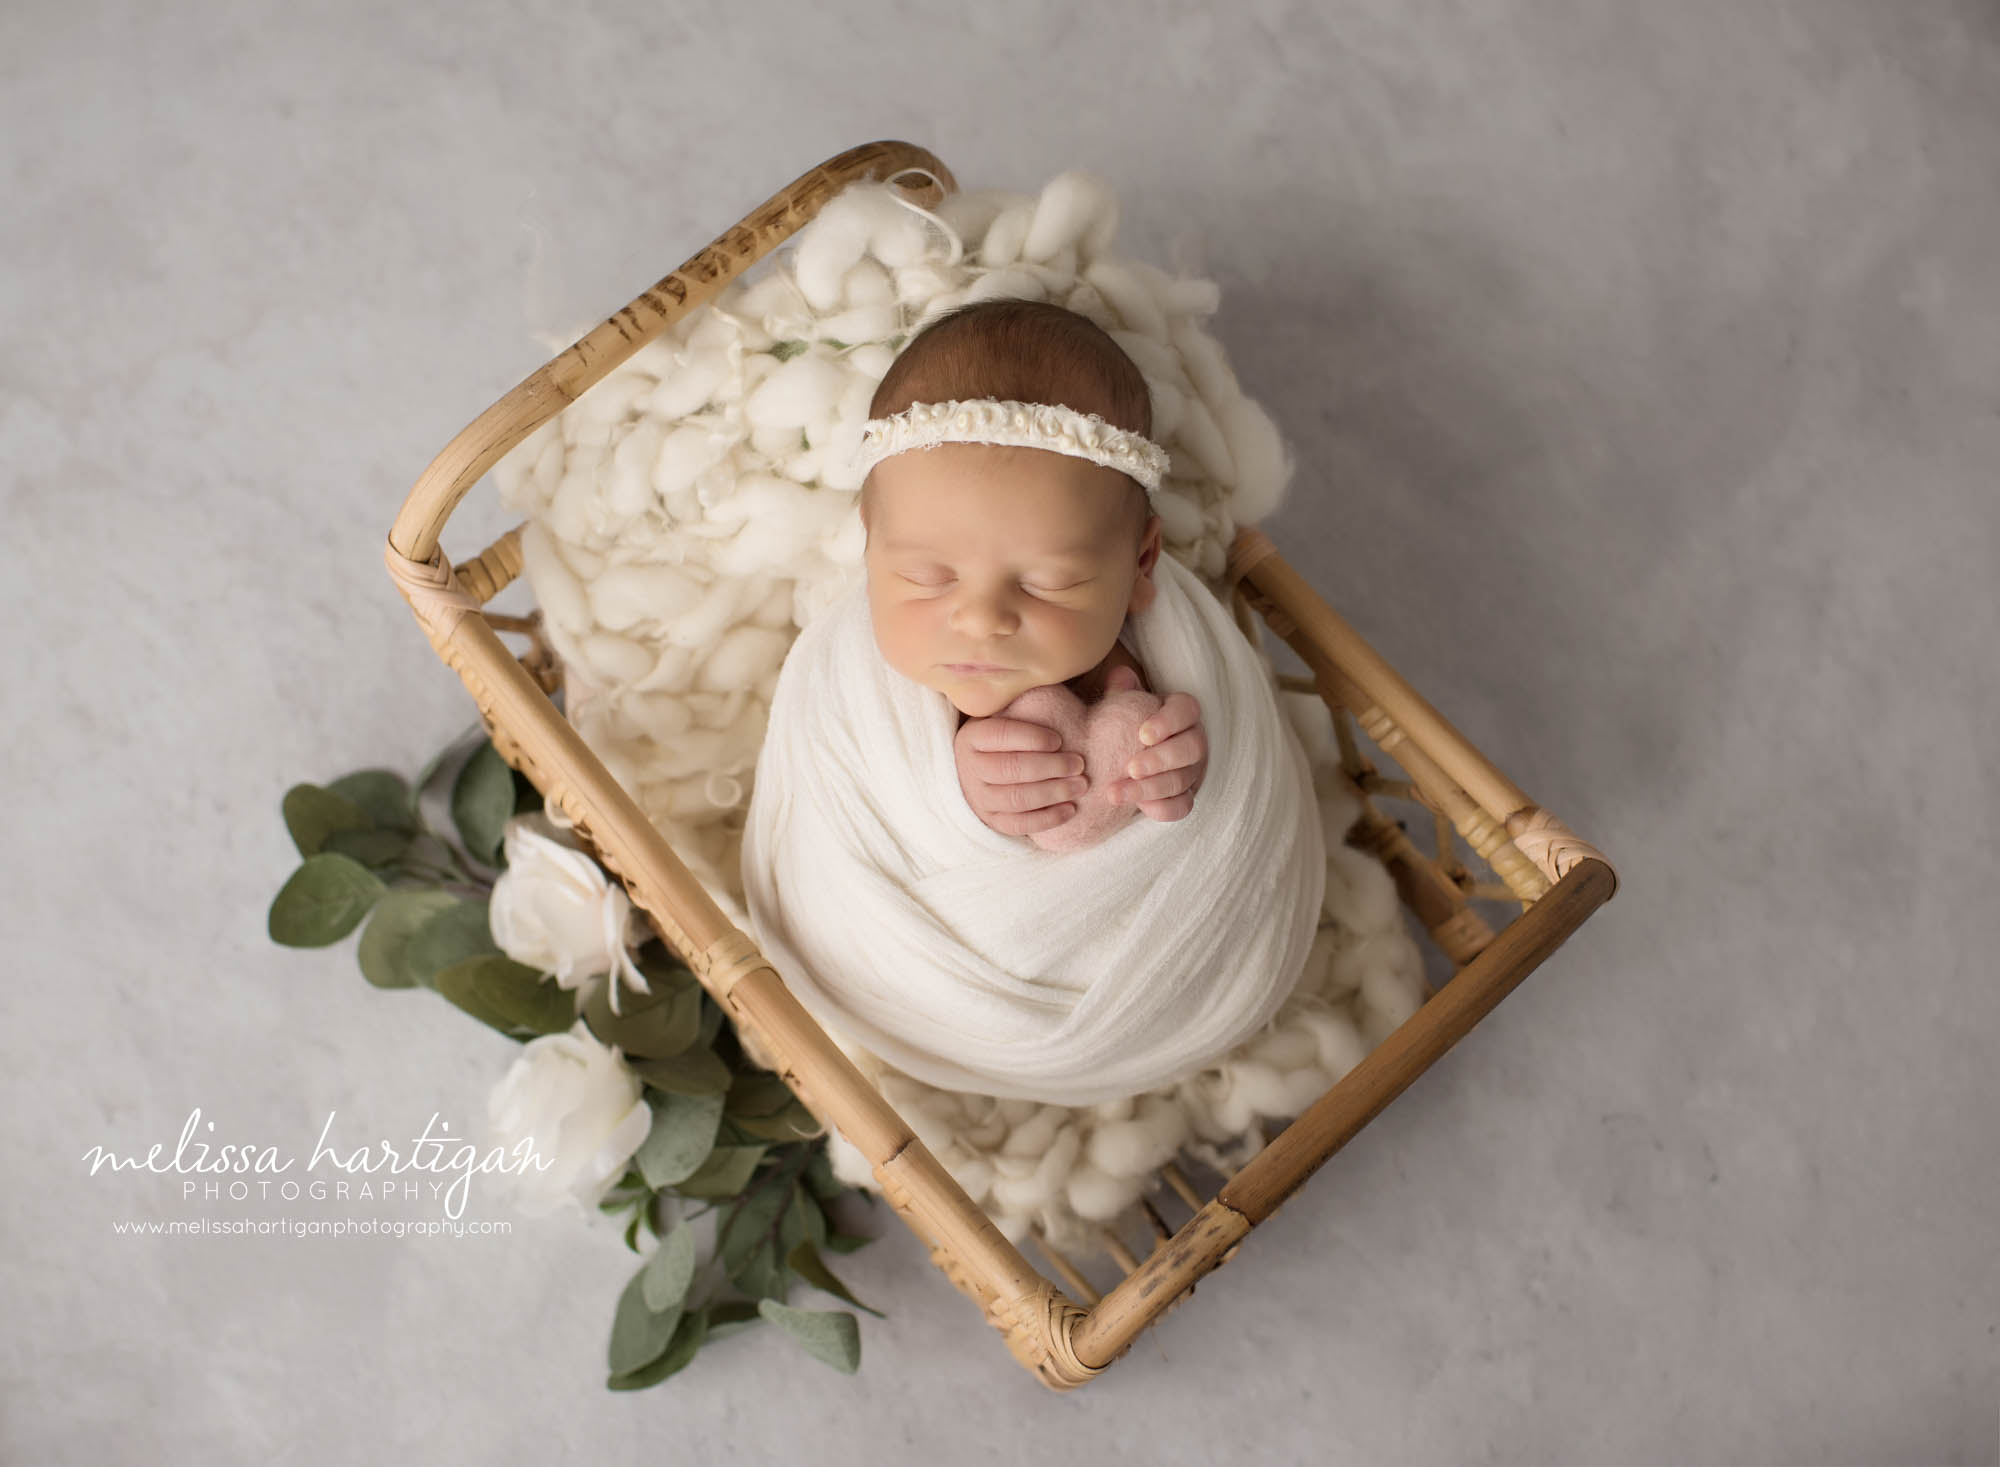 newborn baby girl wrapped in ivory wrap holding pink felted heart prop